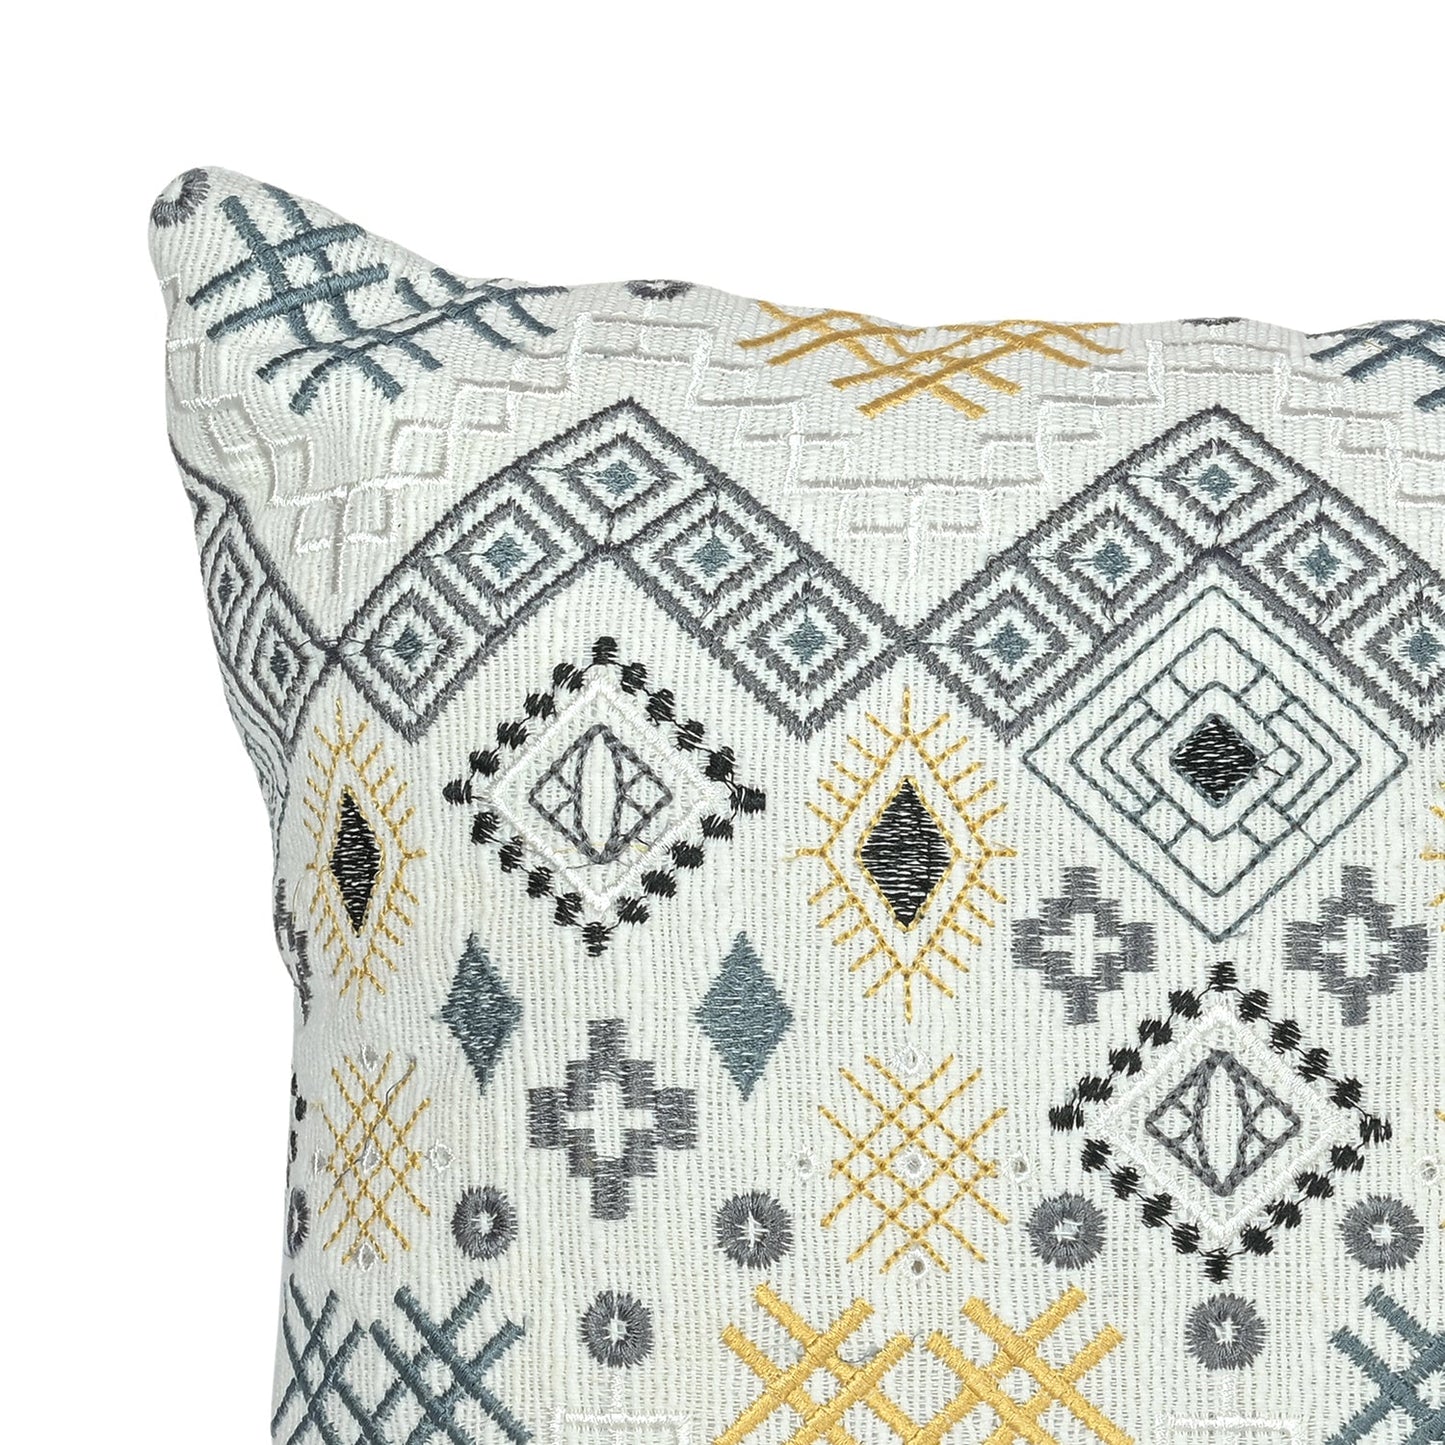 Gray Indian Illusion Throw Pillow Cover - I